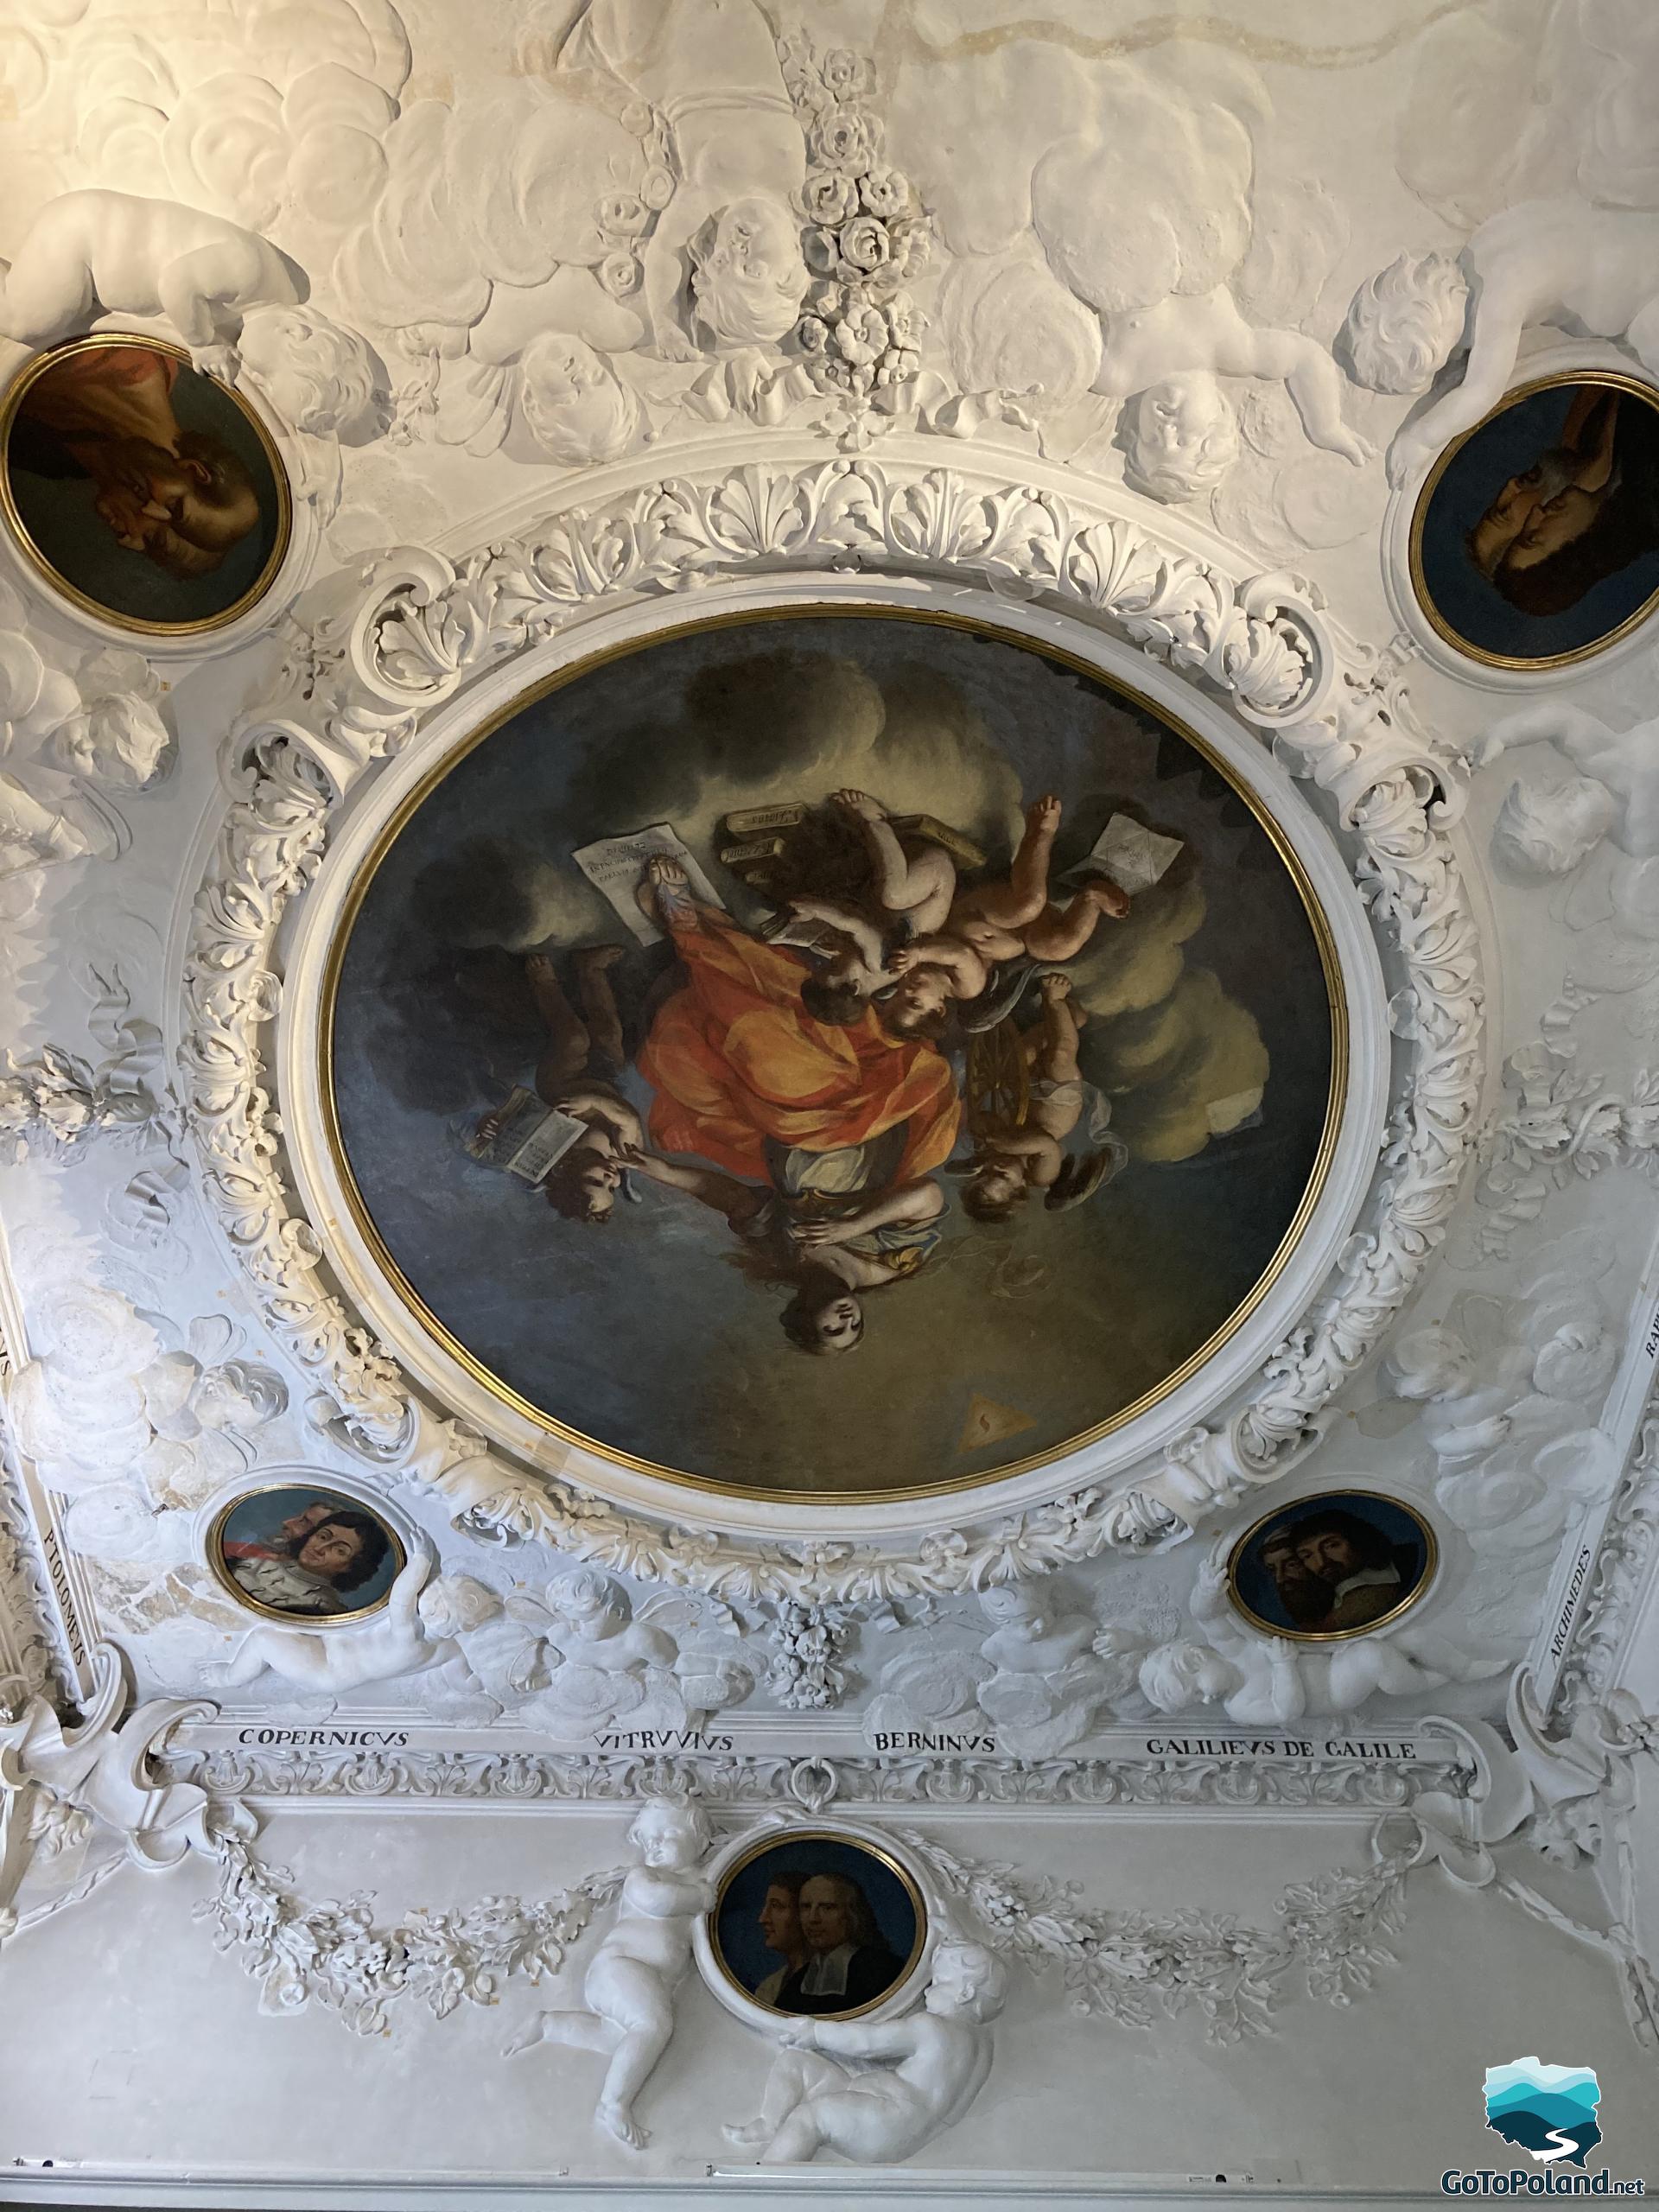 the ceiling is decorated with images of scholars in round frames